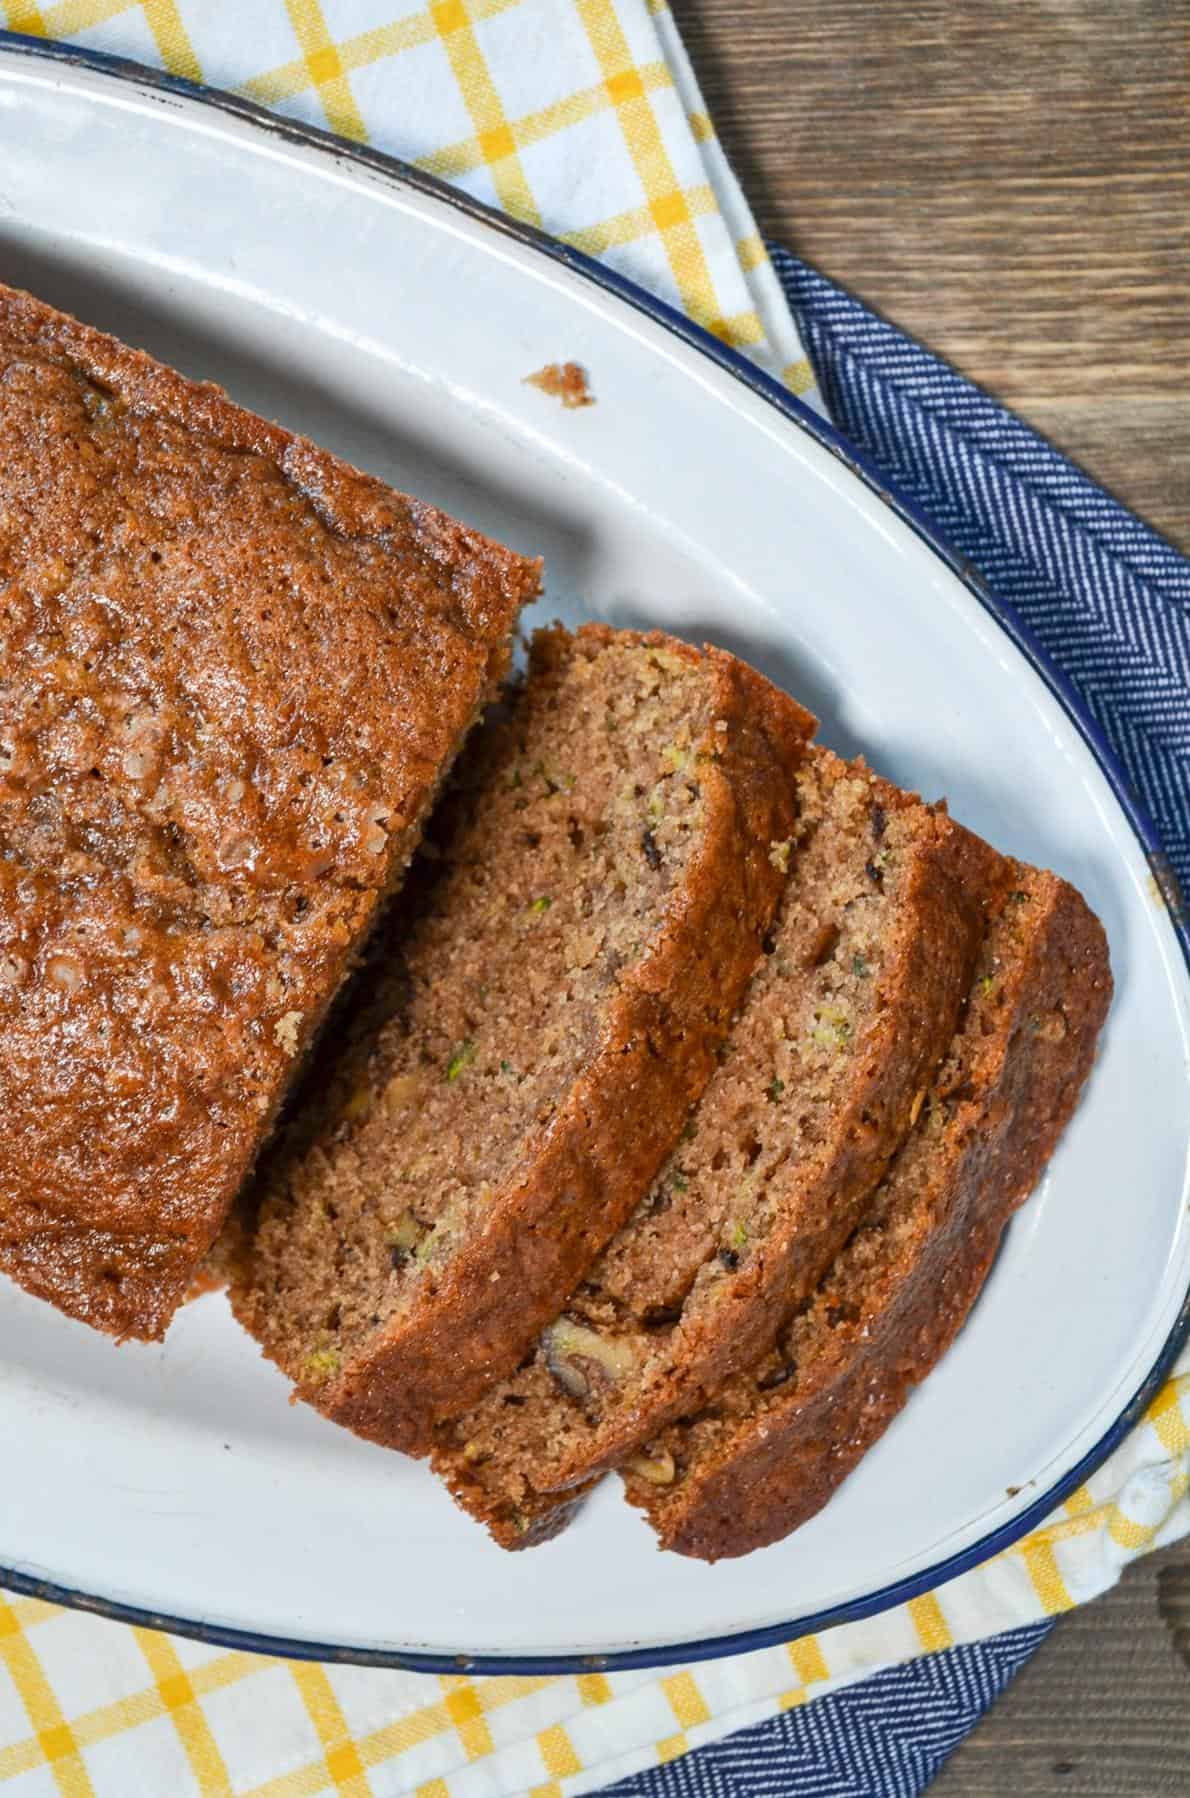  Zucchini is in season and this bread is the perfect way to use up any extra zucchinis you might have.